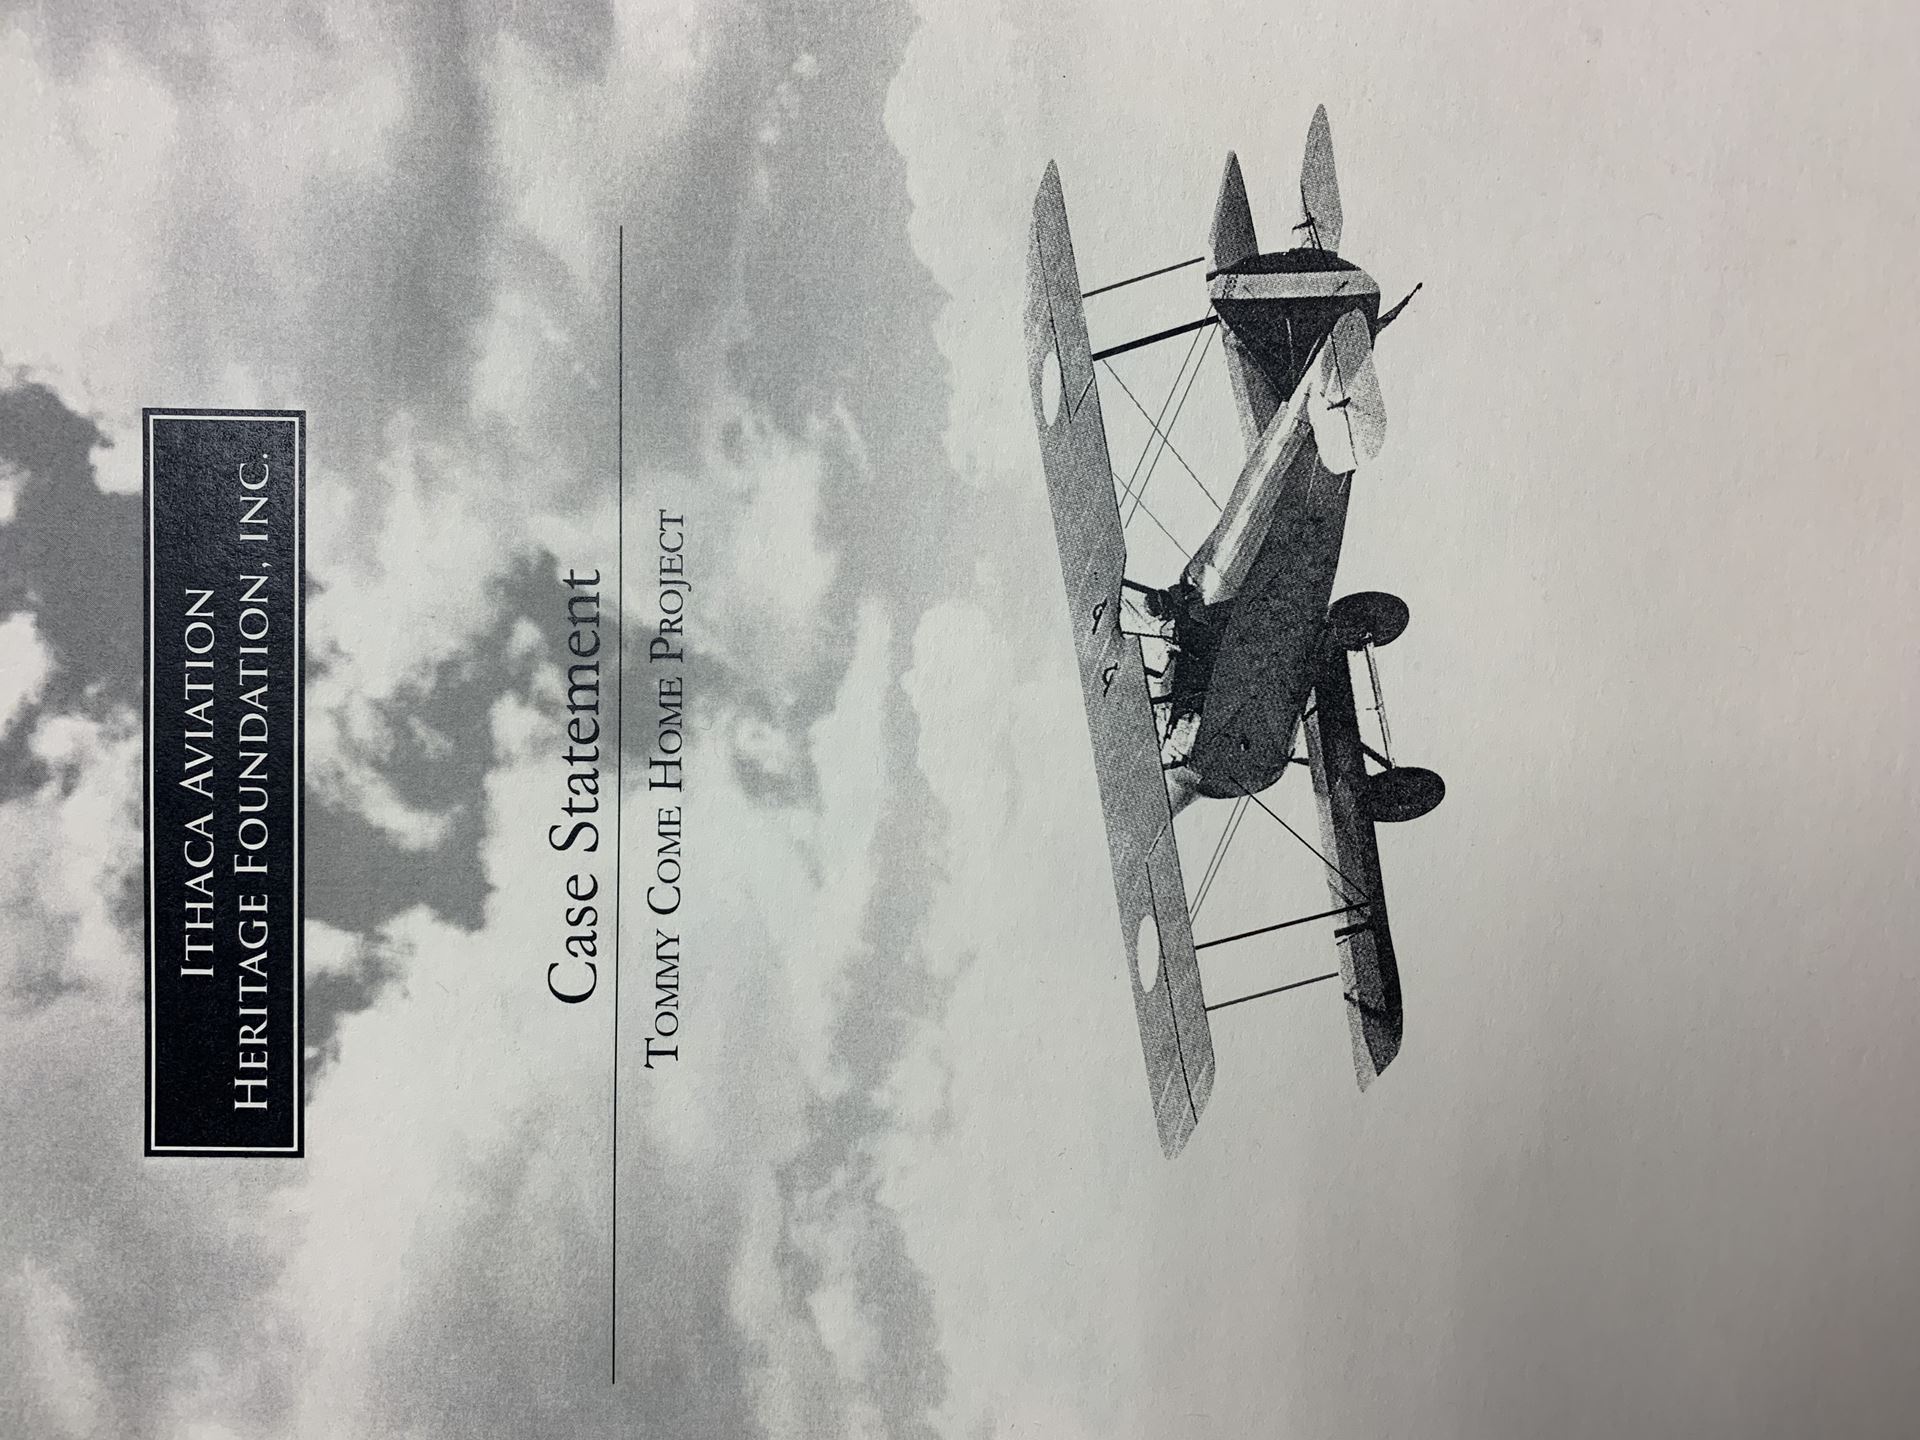 Ithaca Aviation Heritage Foundation case statement for the tommy come home project 